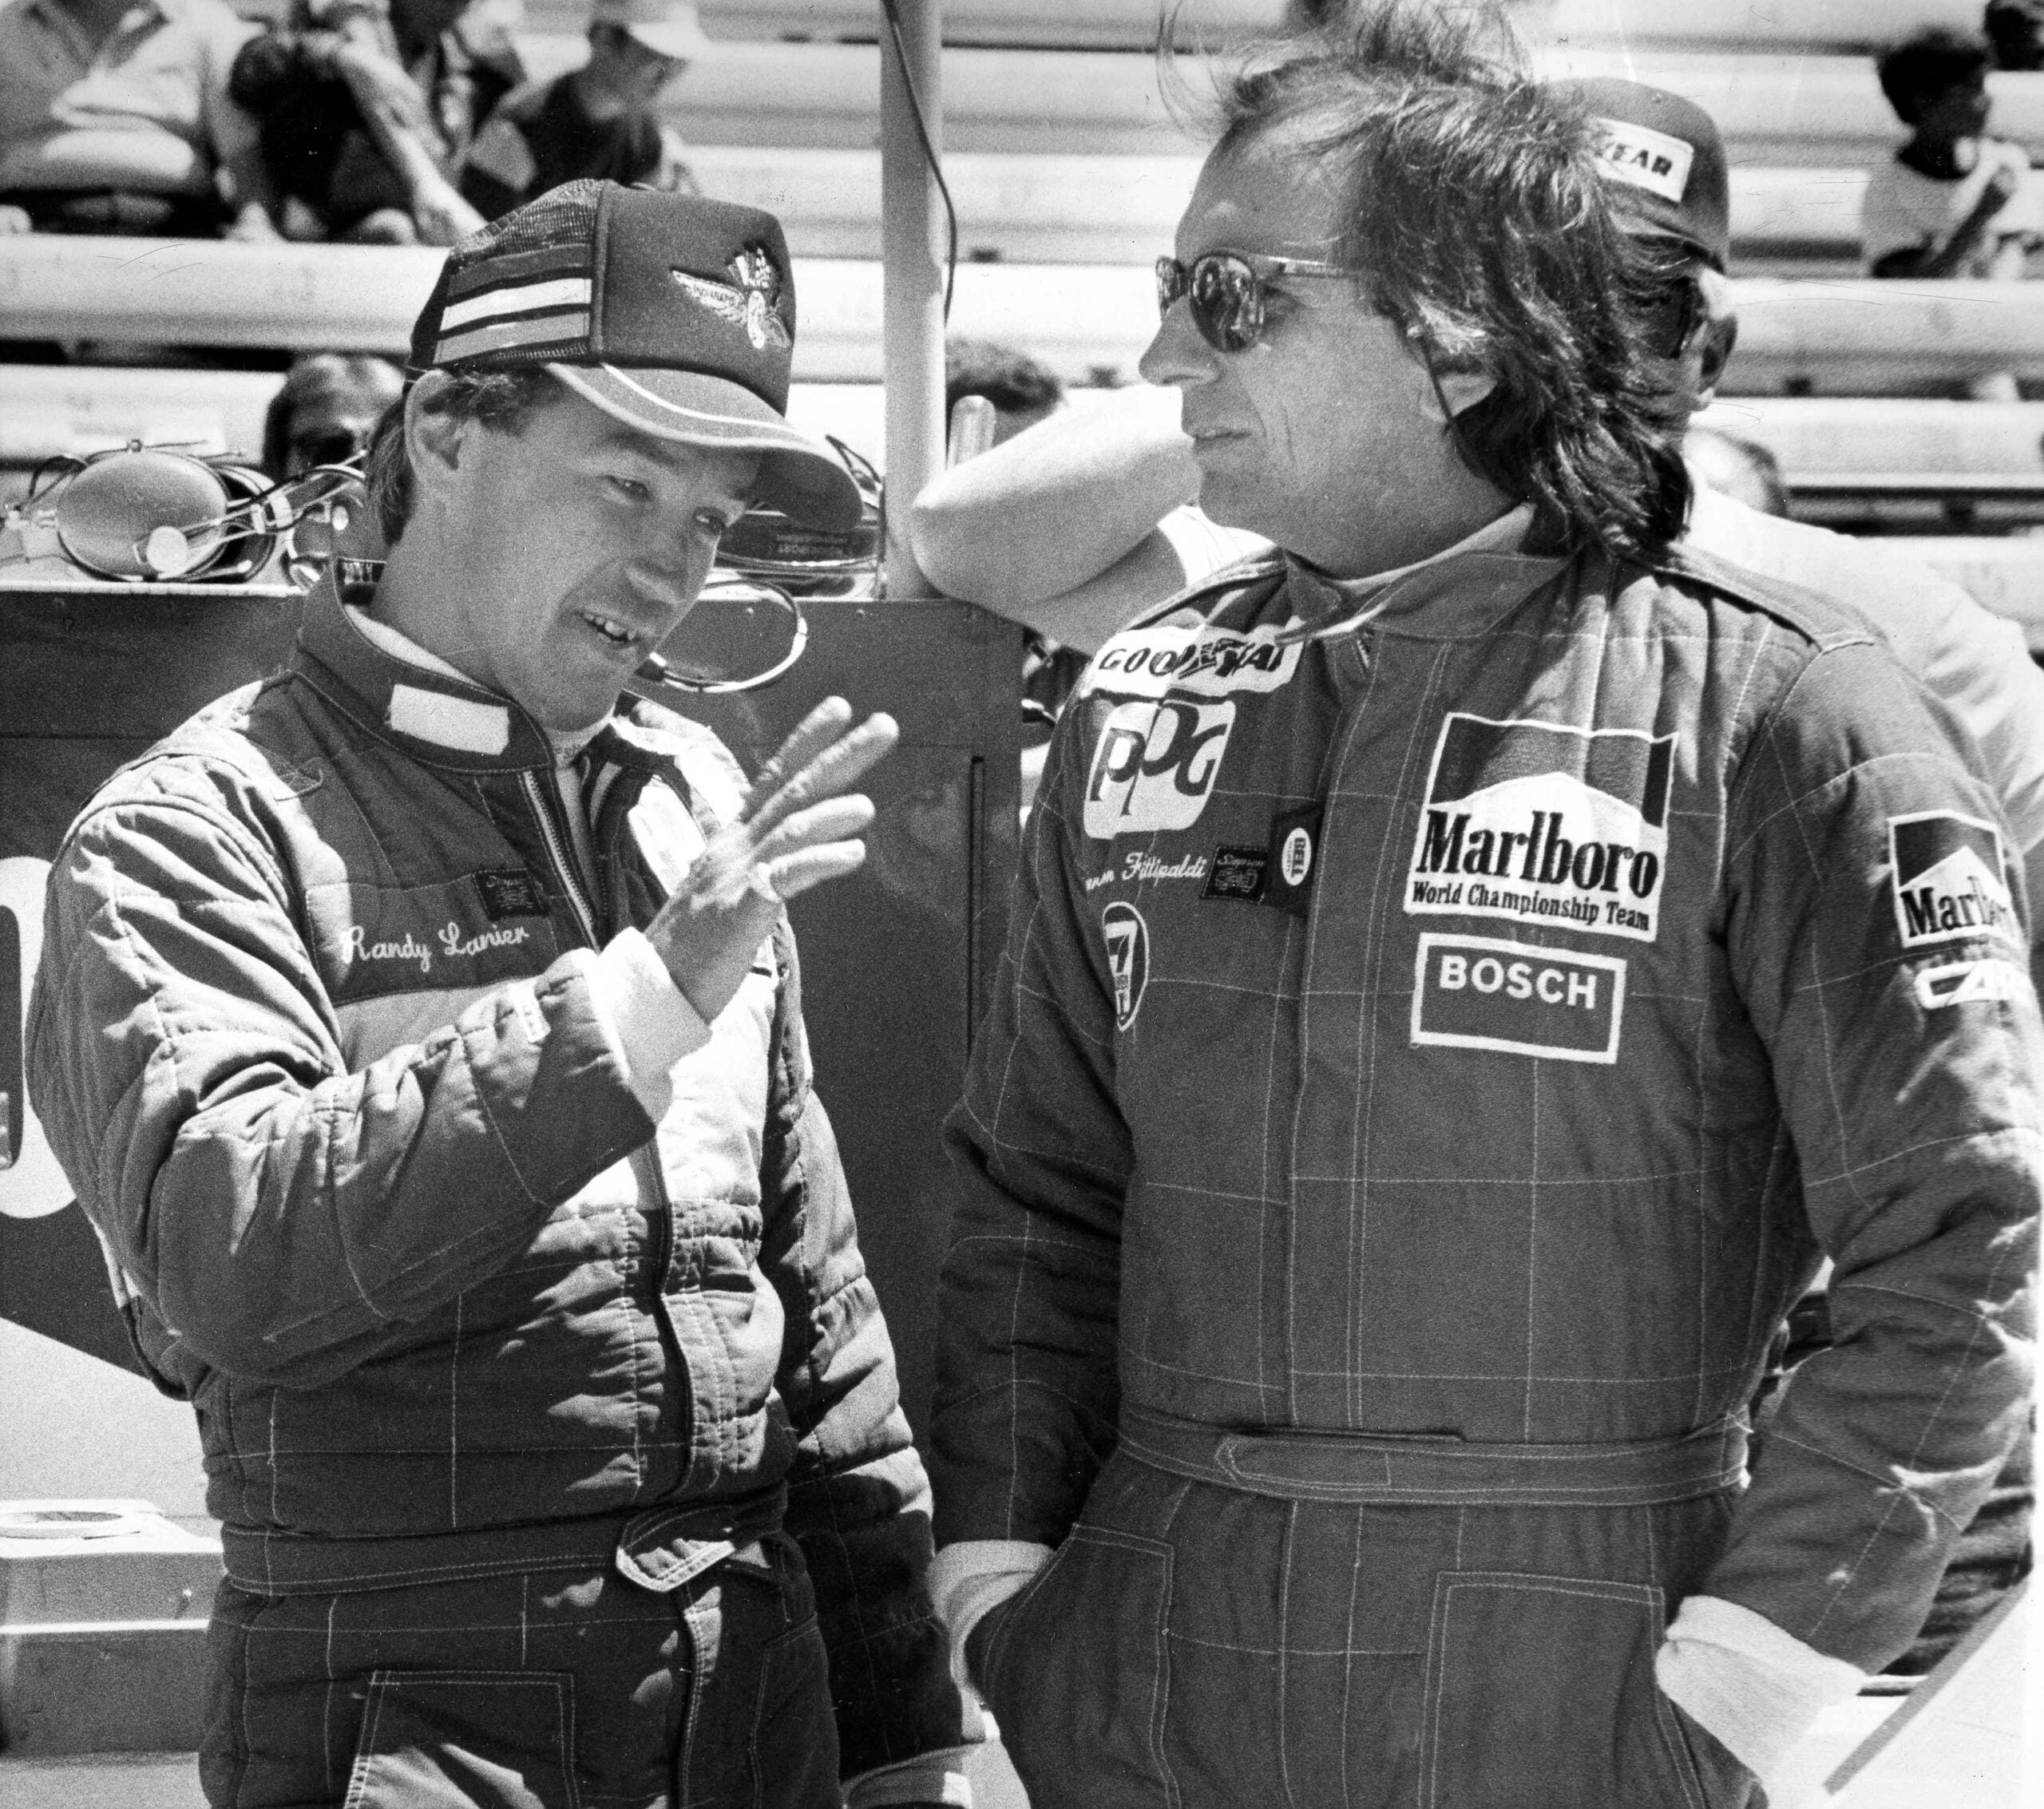 Driver Randy Lanier, left, of Davie, Fla., talks with two-time World Champion Emerson Fittipaldi of Sao Paulo, Brazil, during a break in the action at the Indianapolis Motor Speedway, May 5, 1986. Lanier is attempting to qualify for the Indianapolis 500. (AP Photo/Jerry Mouser)